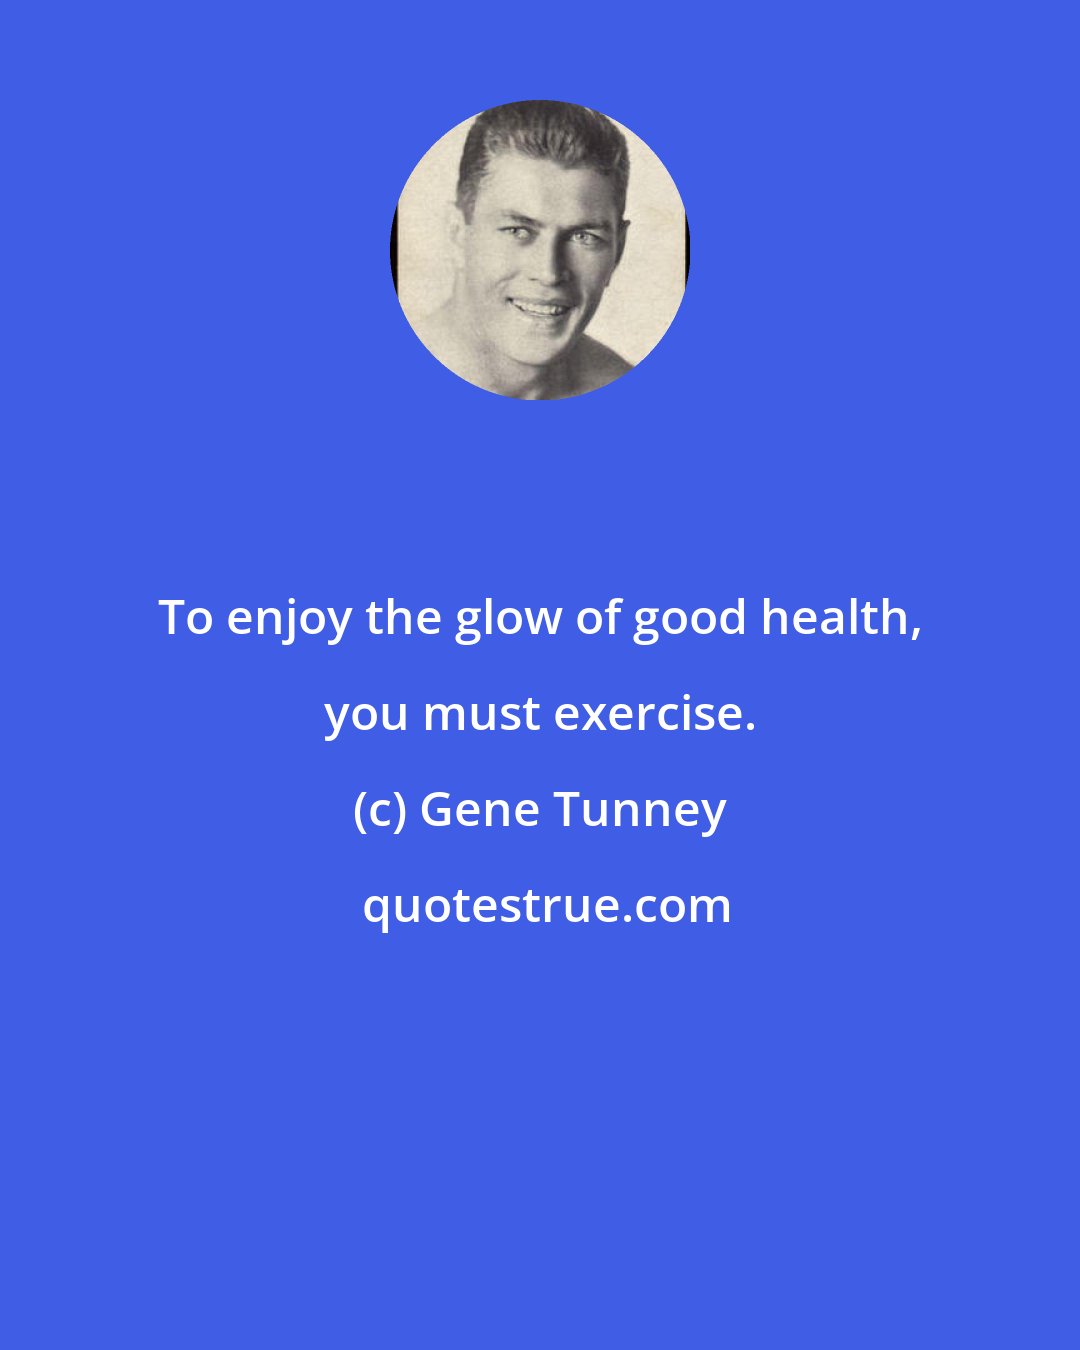 Gene Tunney: To enjoy the glow of good health, you must exercise.